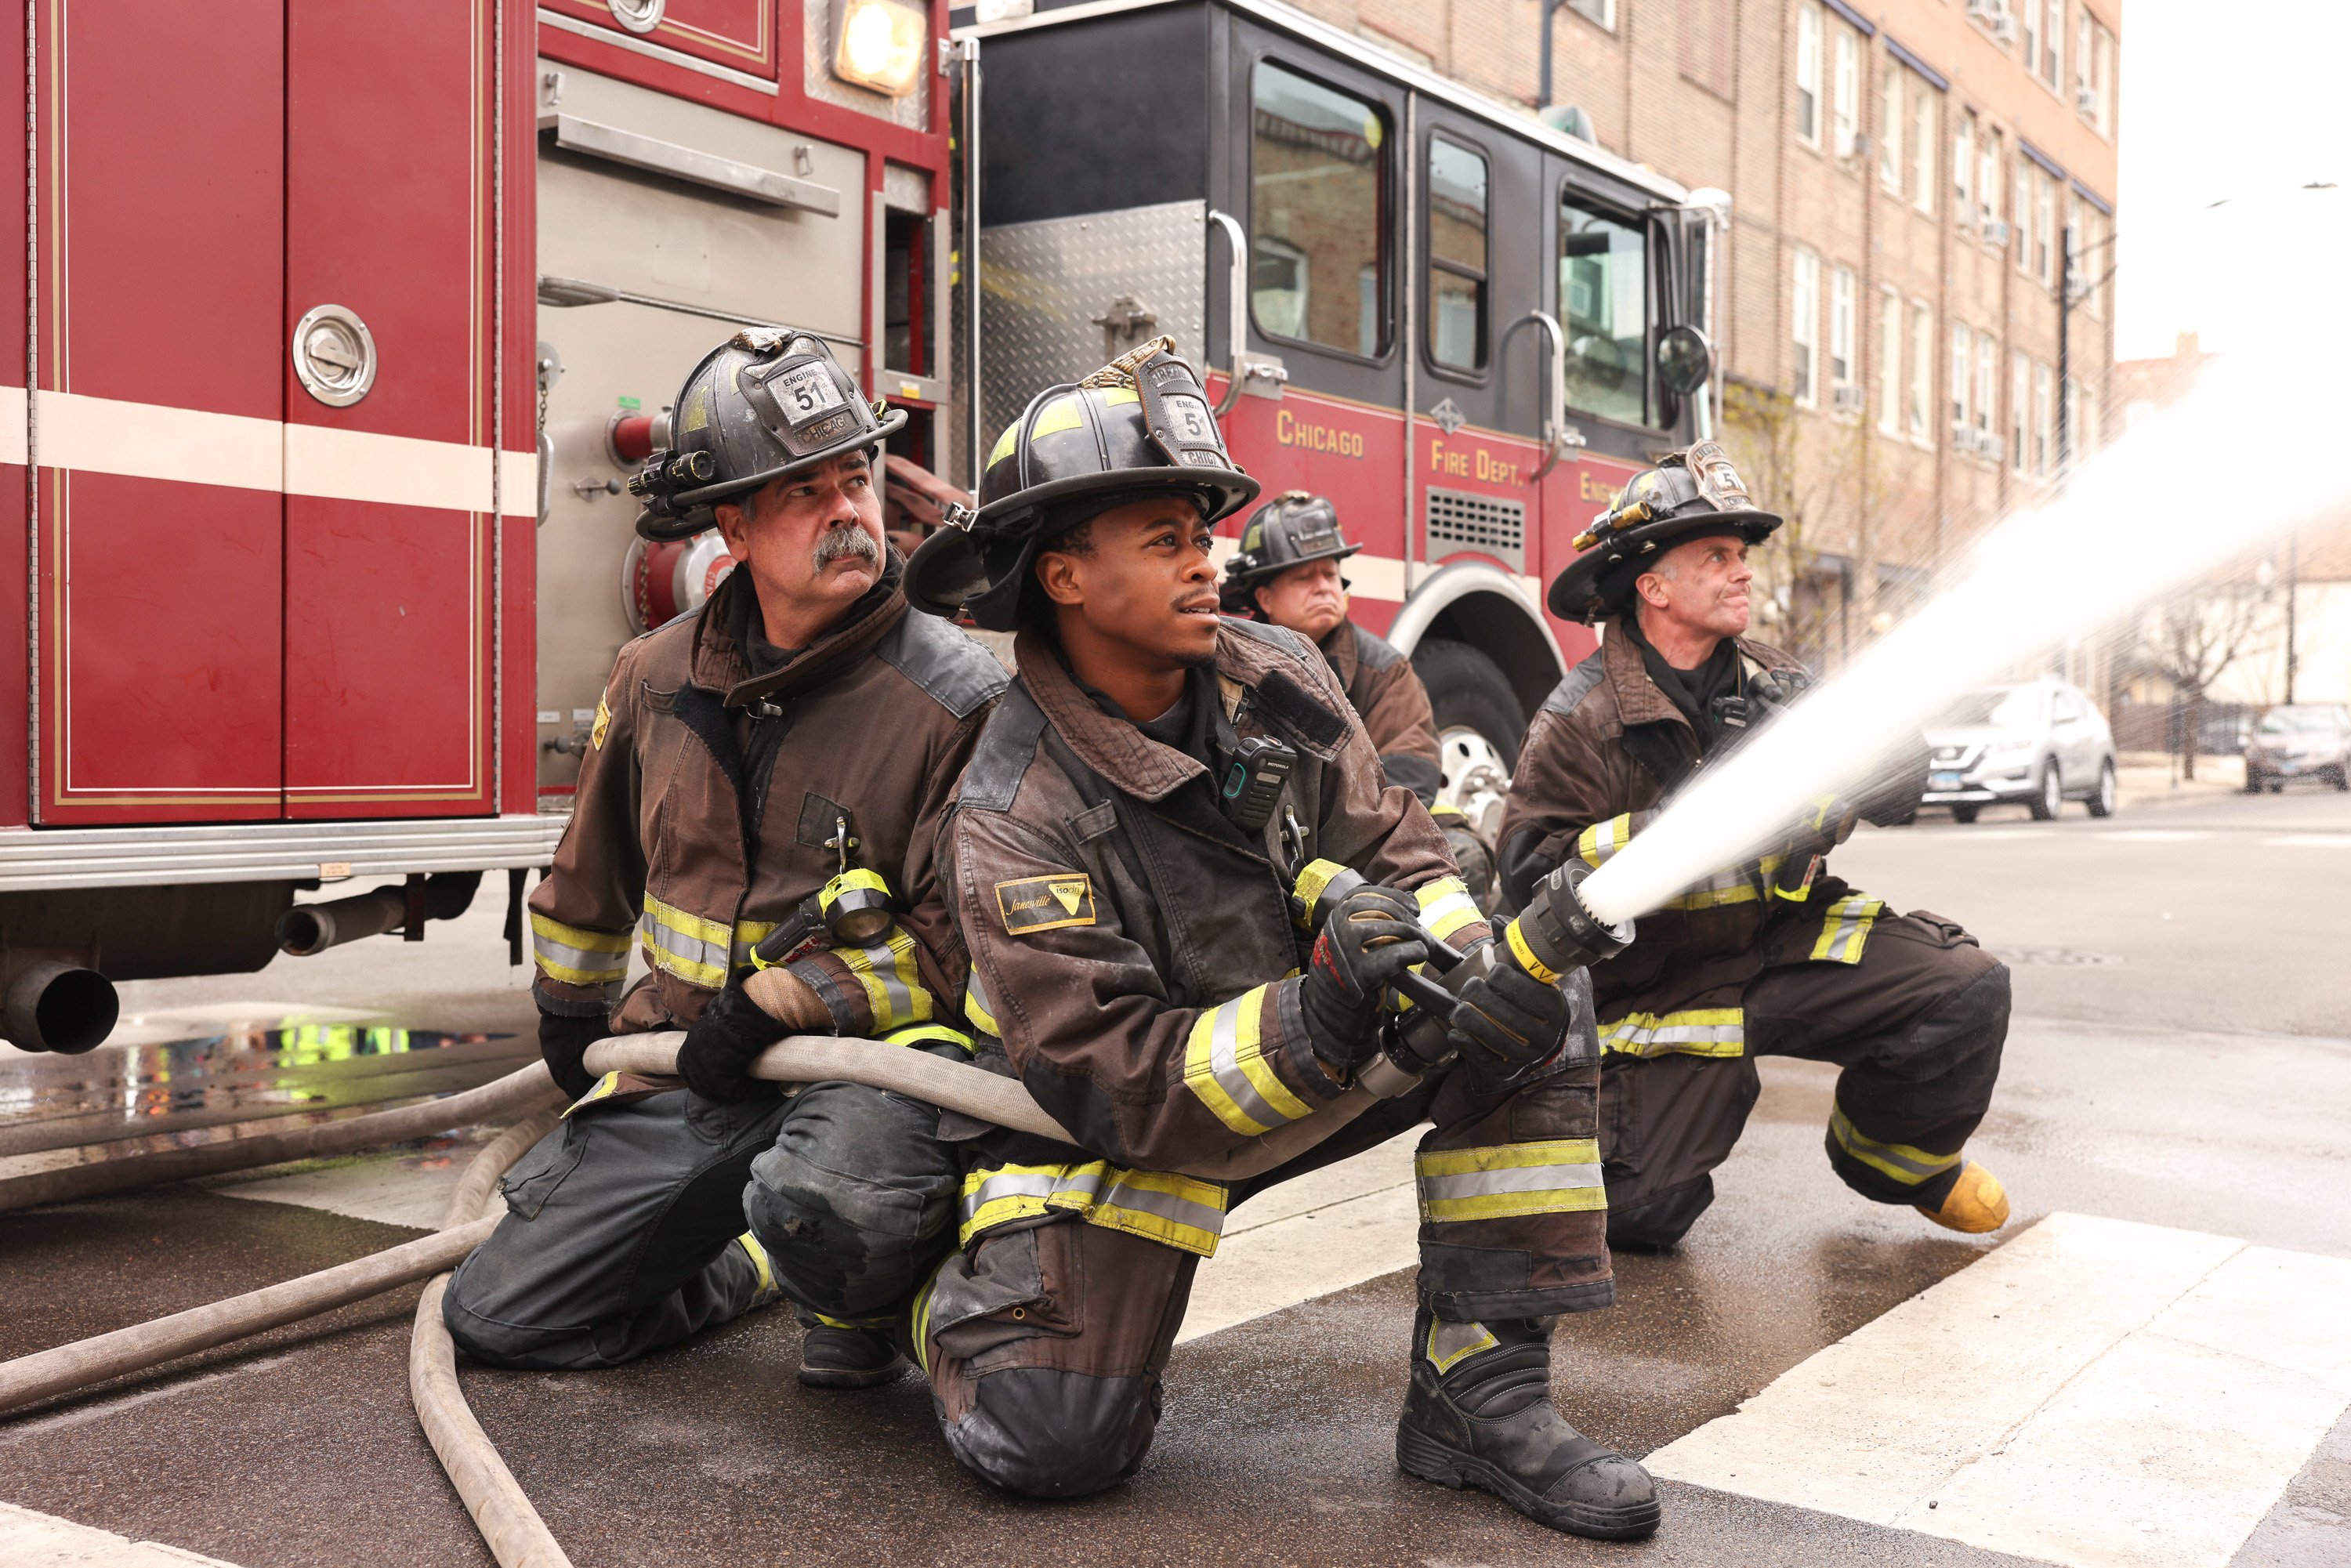 the cast of 'Chicago Fire', including Daniel Kyri and David Eigenberg shoot water at a fire during season 9